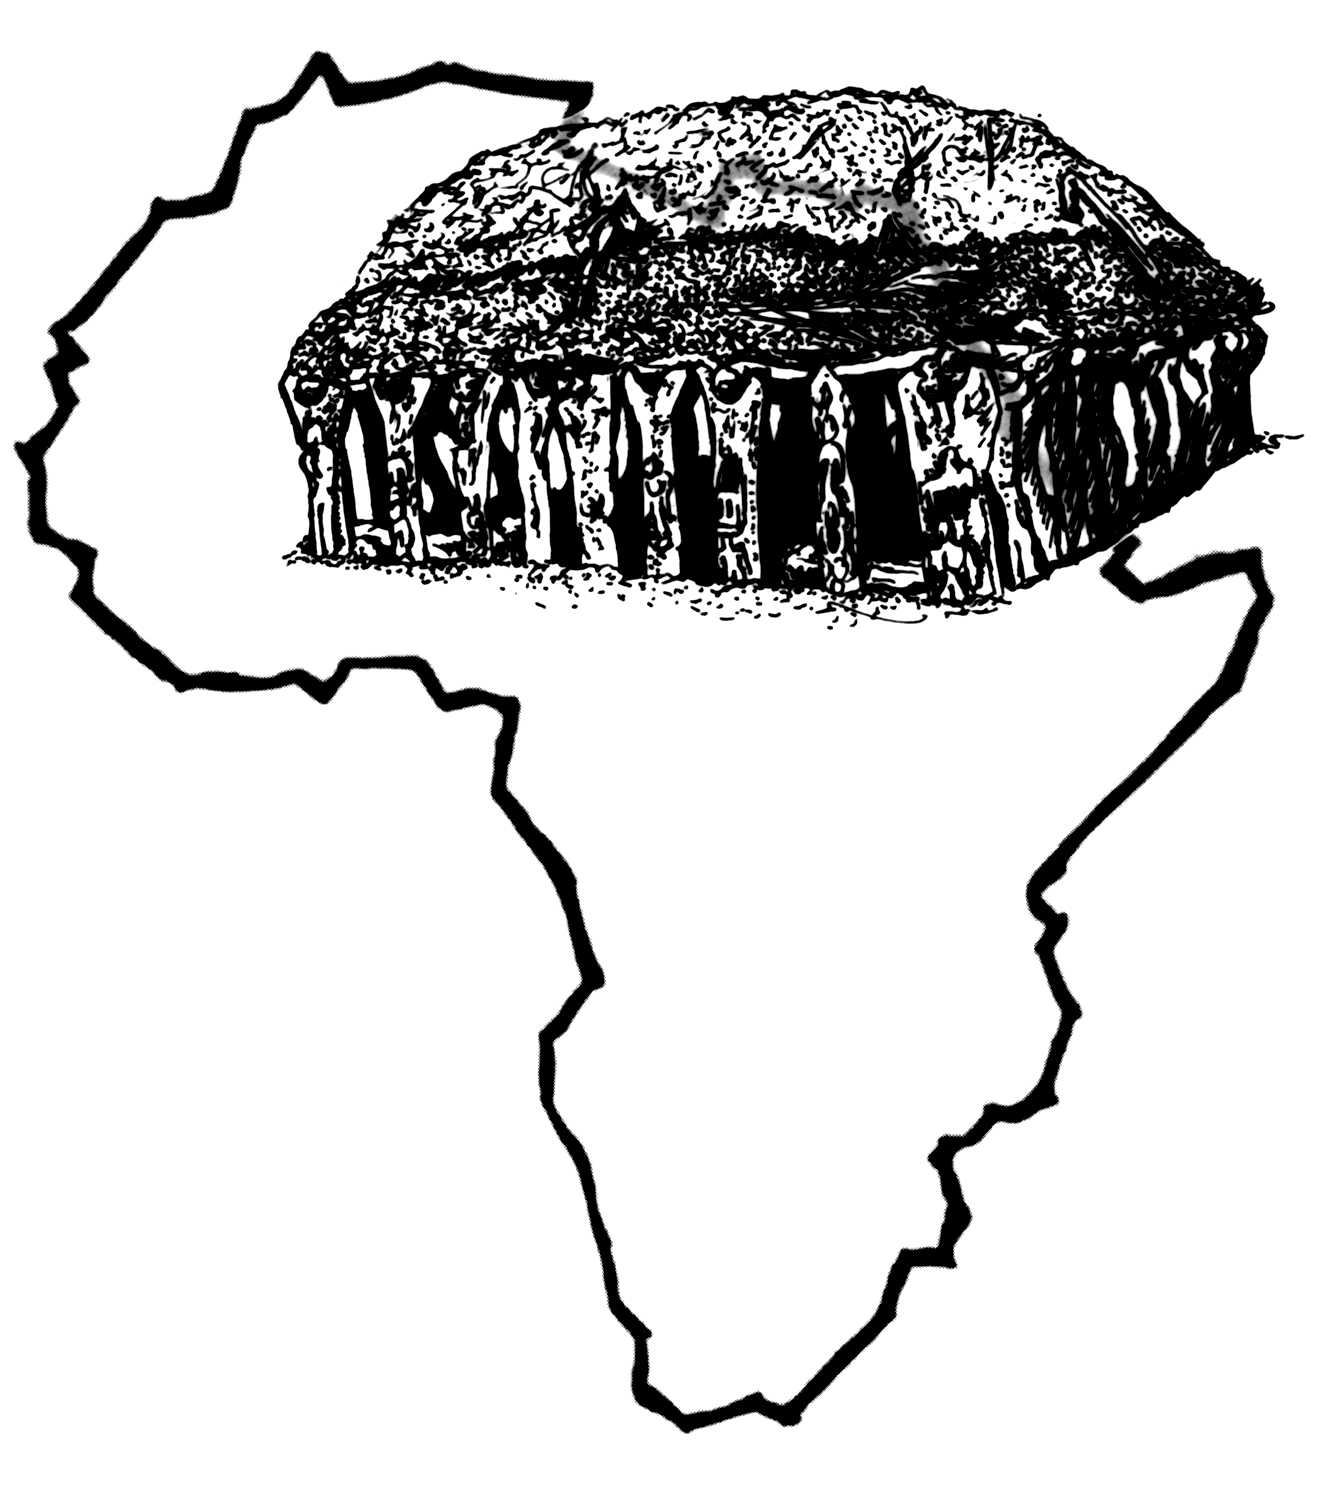 The AFRICA SOCIETY - Home Page